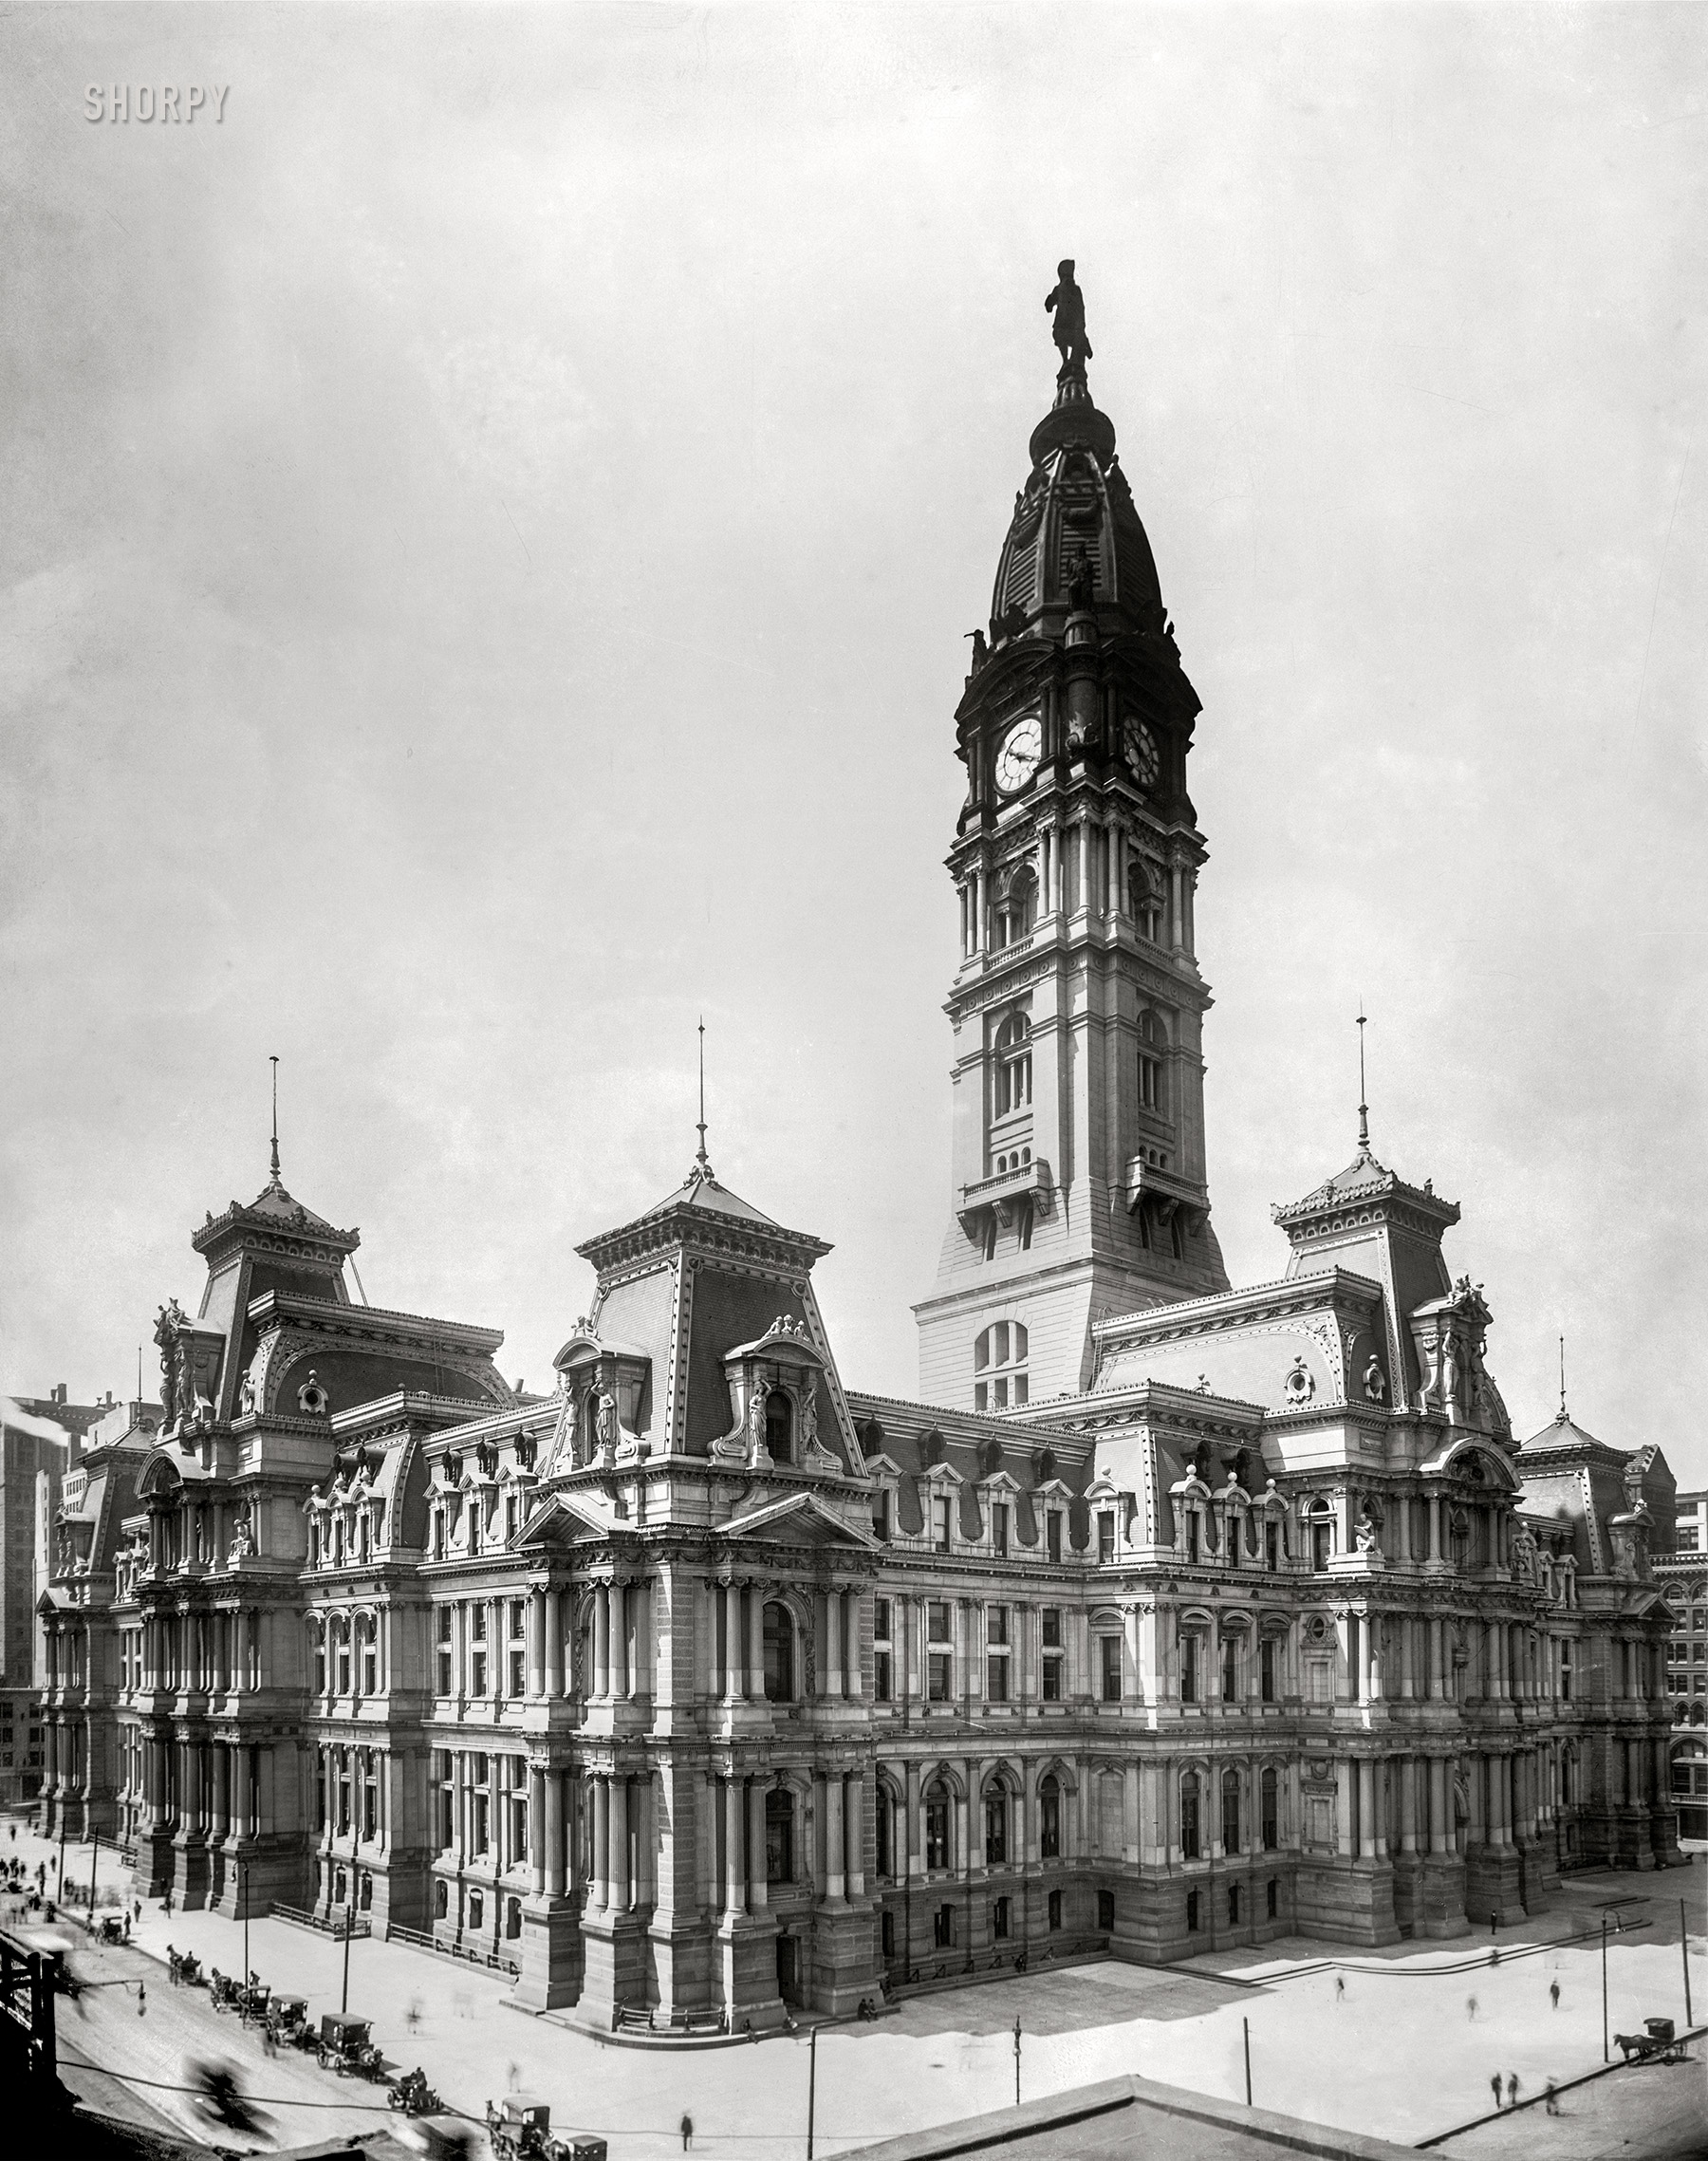 Circa 1905. "City Hall -- Philadelphia, Pa." The largest municipal building in the United States, City Hall is topped by a 26-ton statue of William Penn. 8x10 inch glass negative. View full size.